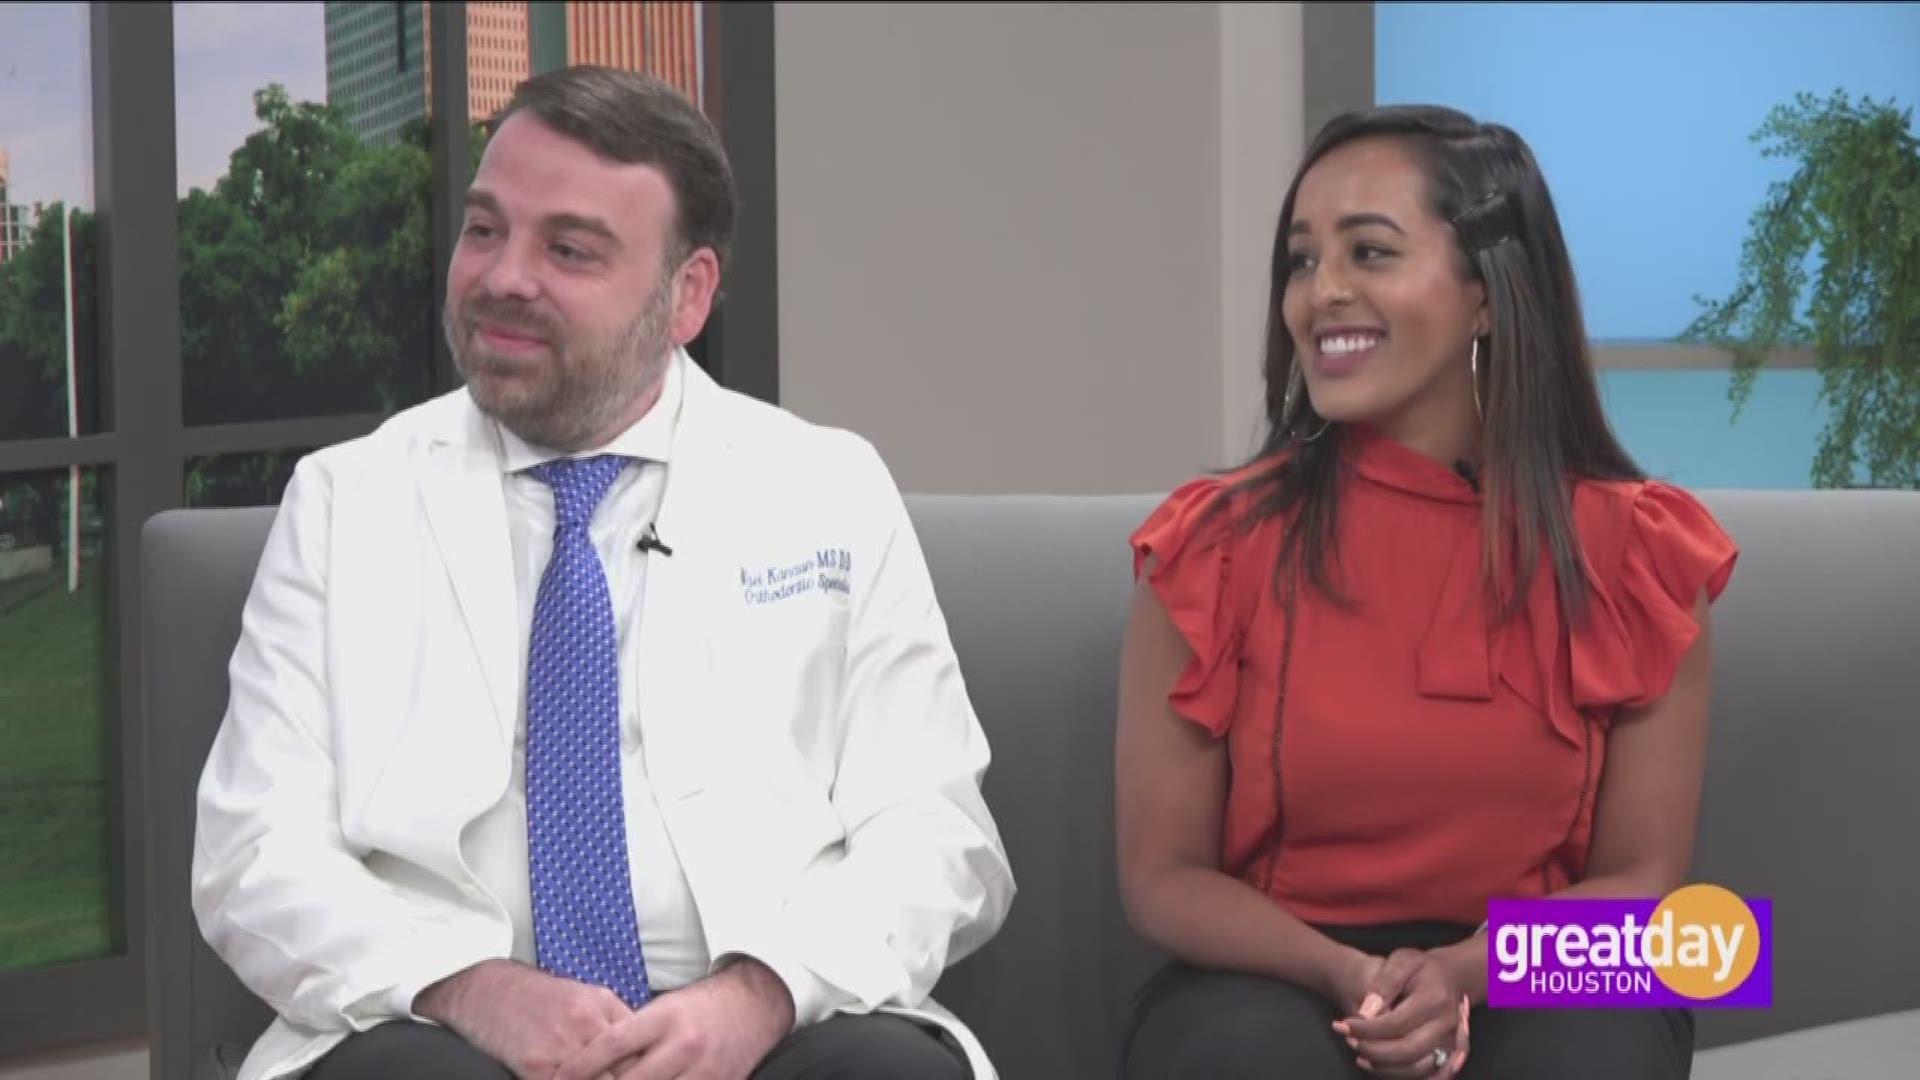 iSmile Specialist Dr. Wael Kanaan can fix many problems with your bite and jaw, without surgery. Listen to a testimonial from his patient, Supriya Sharma-Kanabar.